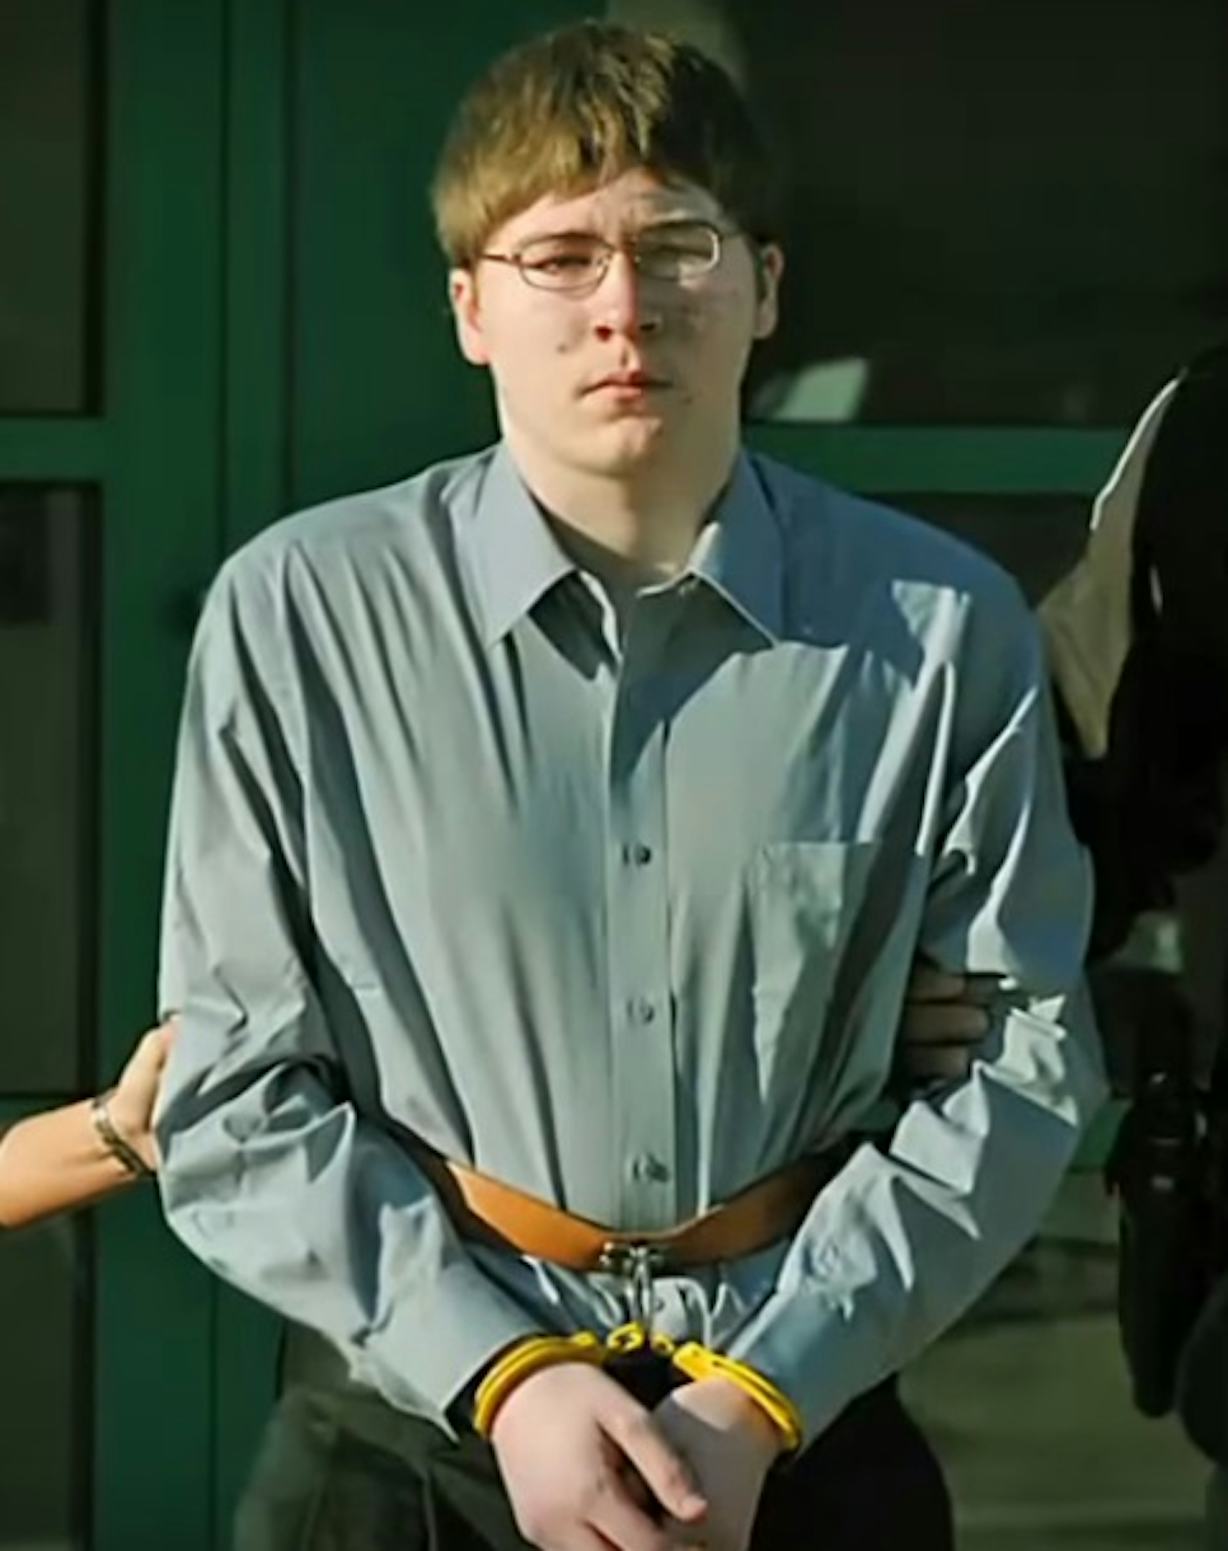 What Will Brendan Dassey Do Next He Was Just Released From Prison